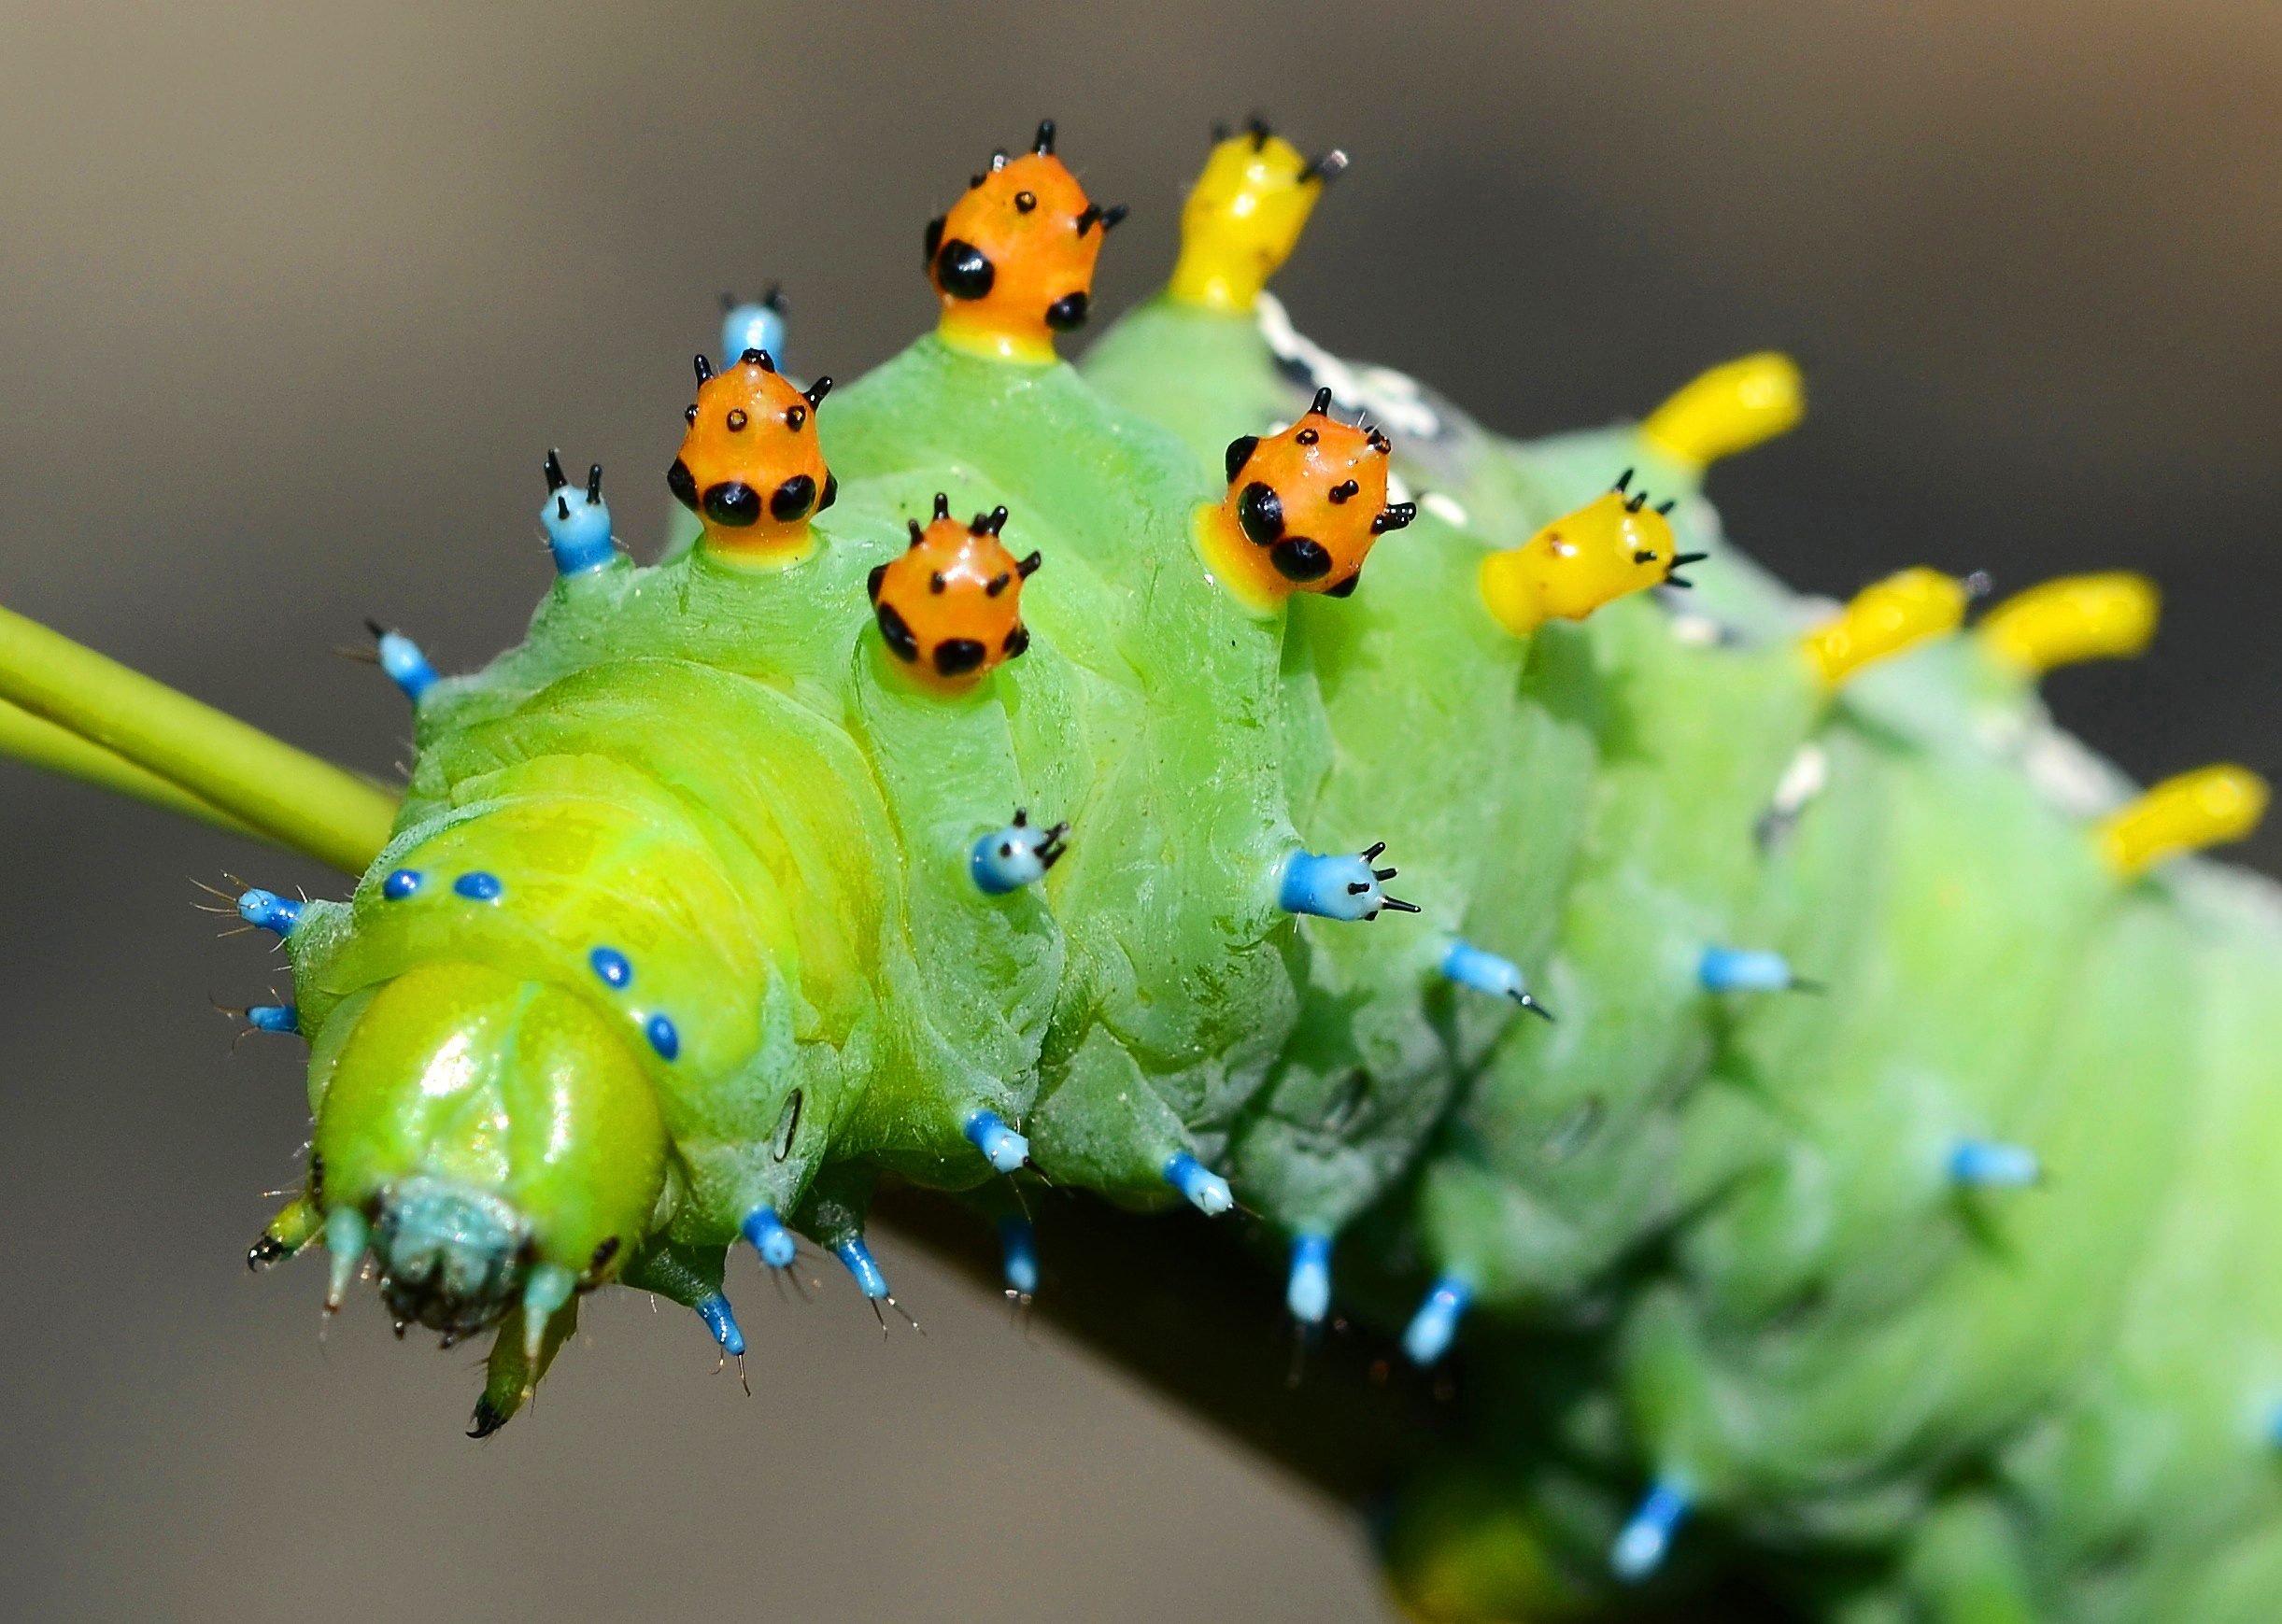 Quiz: How Many Types of Caterpillars Can You Identify?